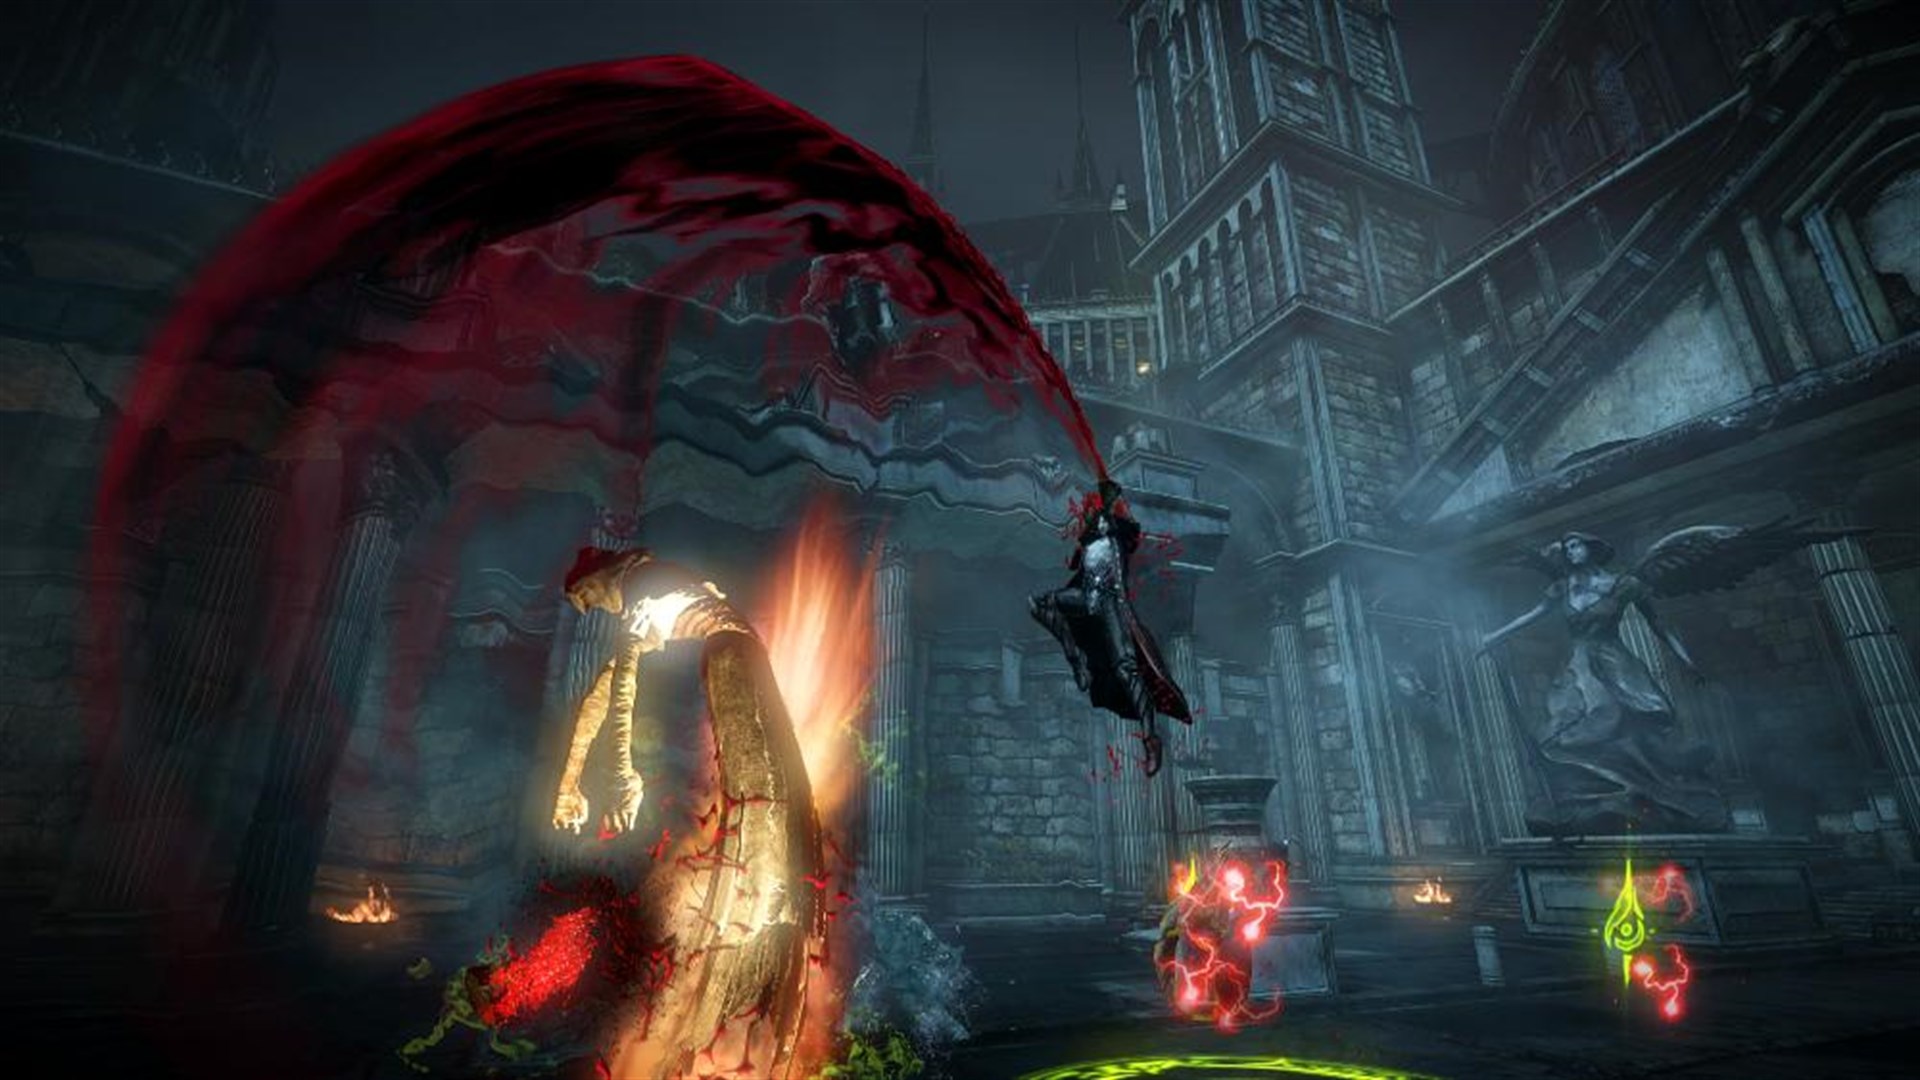 Castlevania: Lords of Shadow 2 released